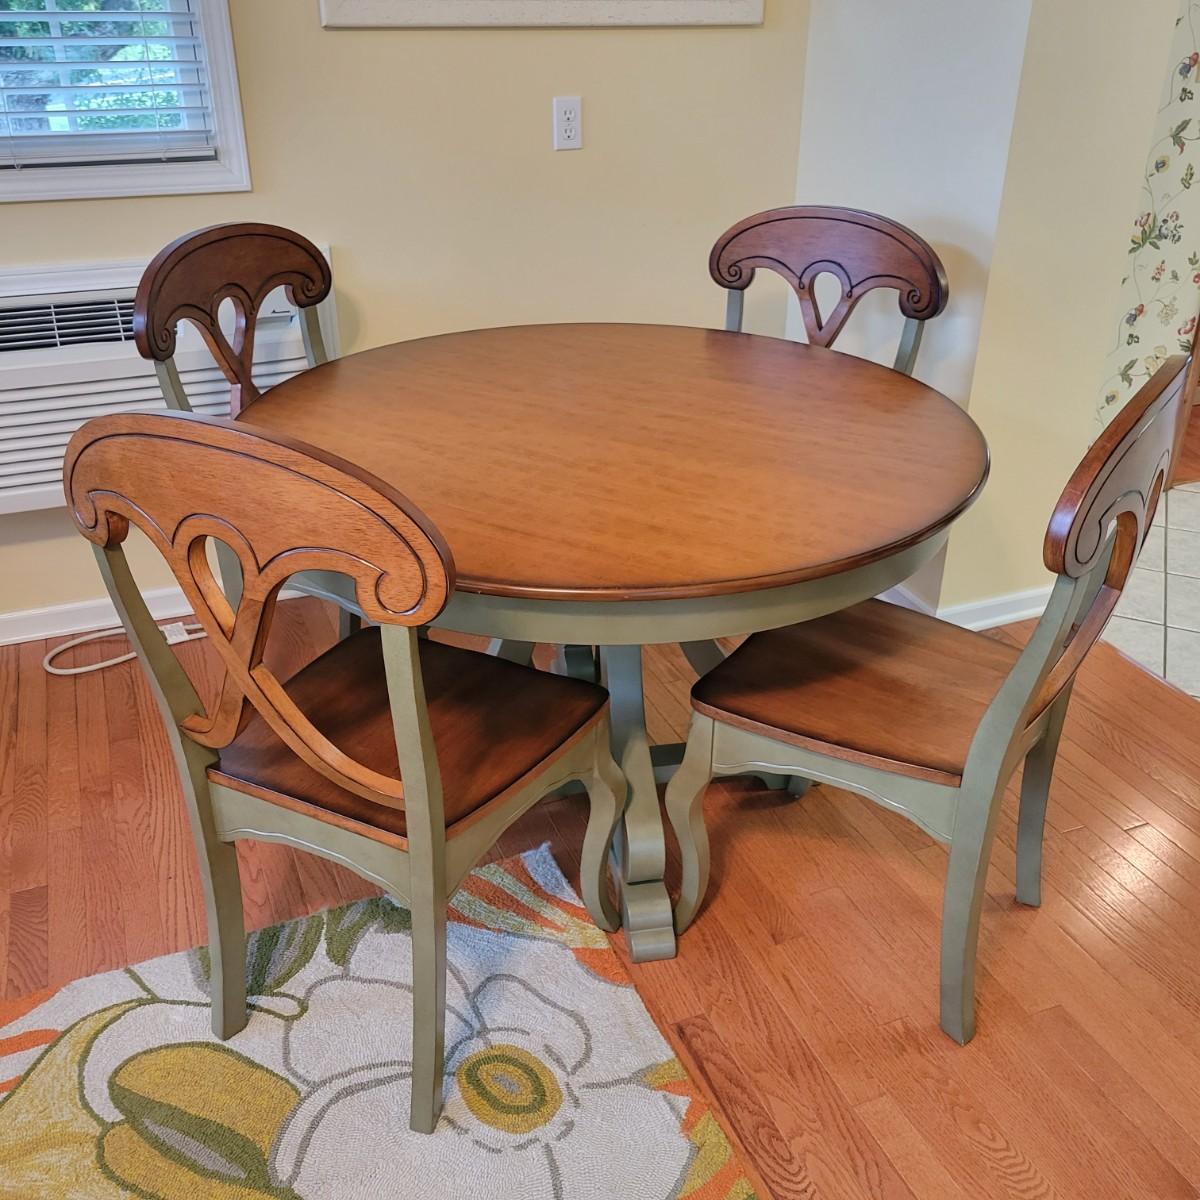 Pier 1 Imports Table and Chairs (SR-DW) | EstateSales.org